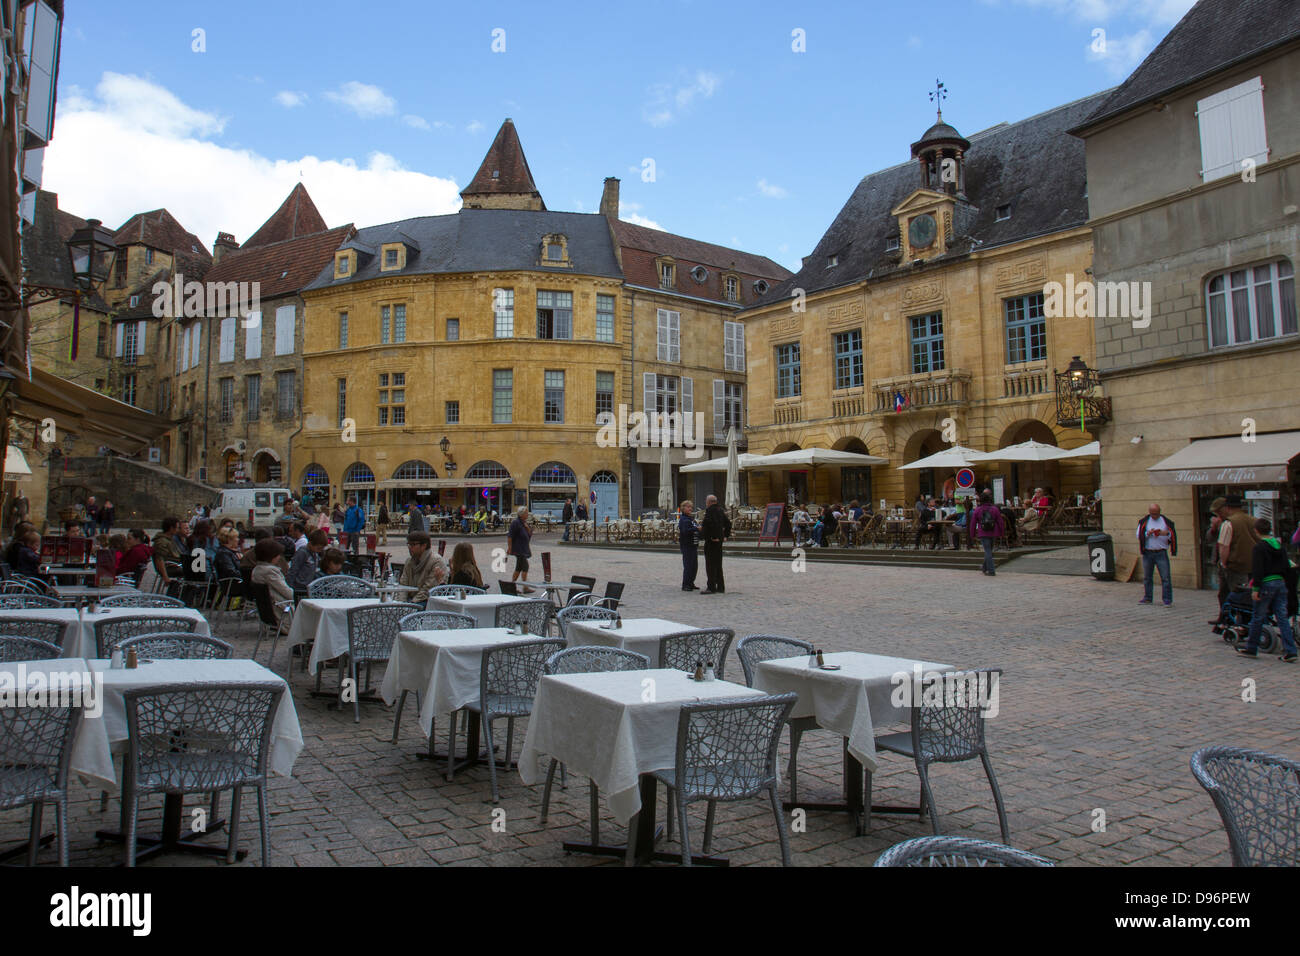 Tourstis stroll and eat in cafes in Liberty Plaza in the center of charming Sarlat, Dordogne region of France Stock Photo